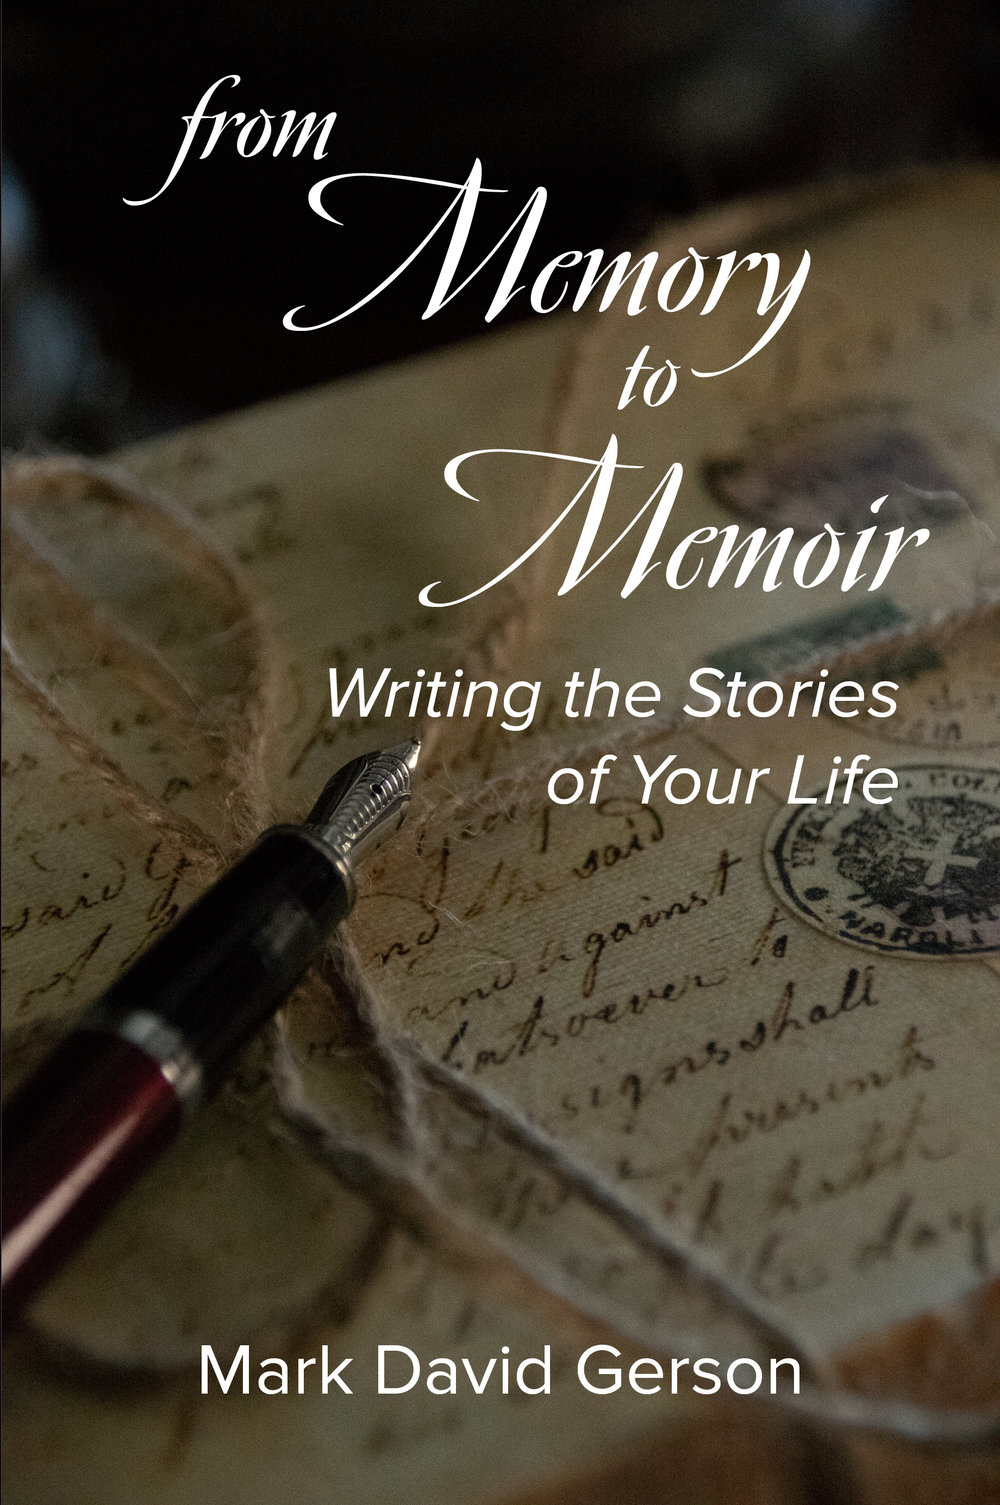 Writing　Stories　From　Gerson　Memoir:　Memory　Life　—　to　Your　the　of　Mark　David